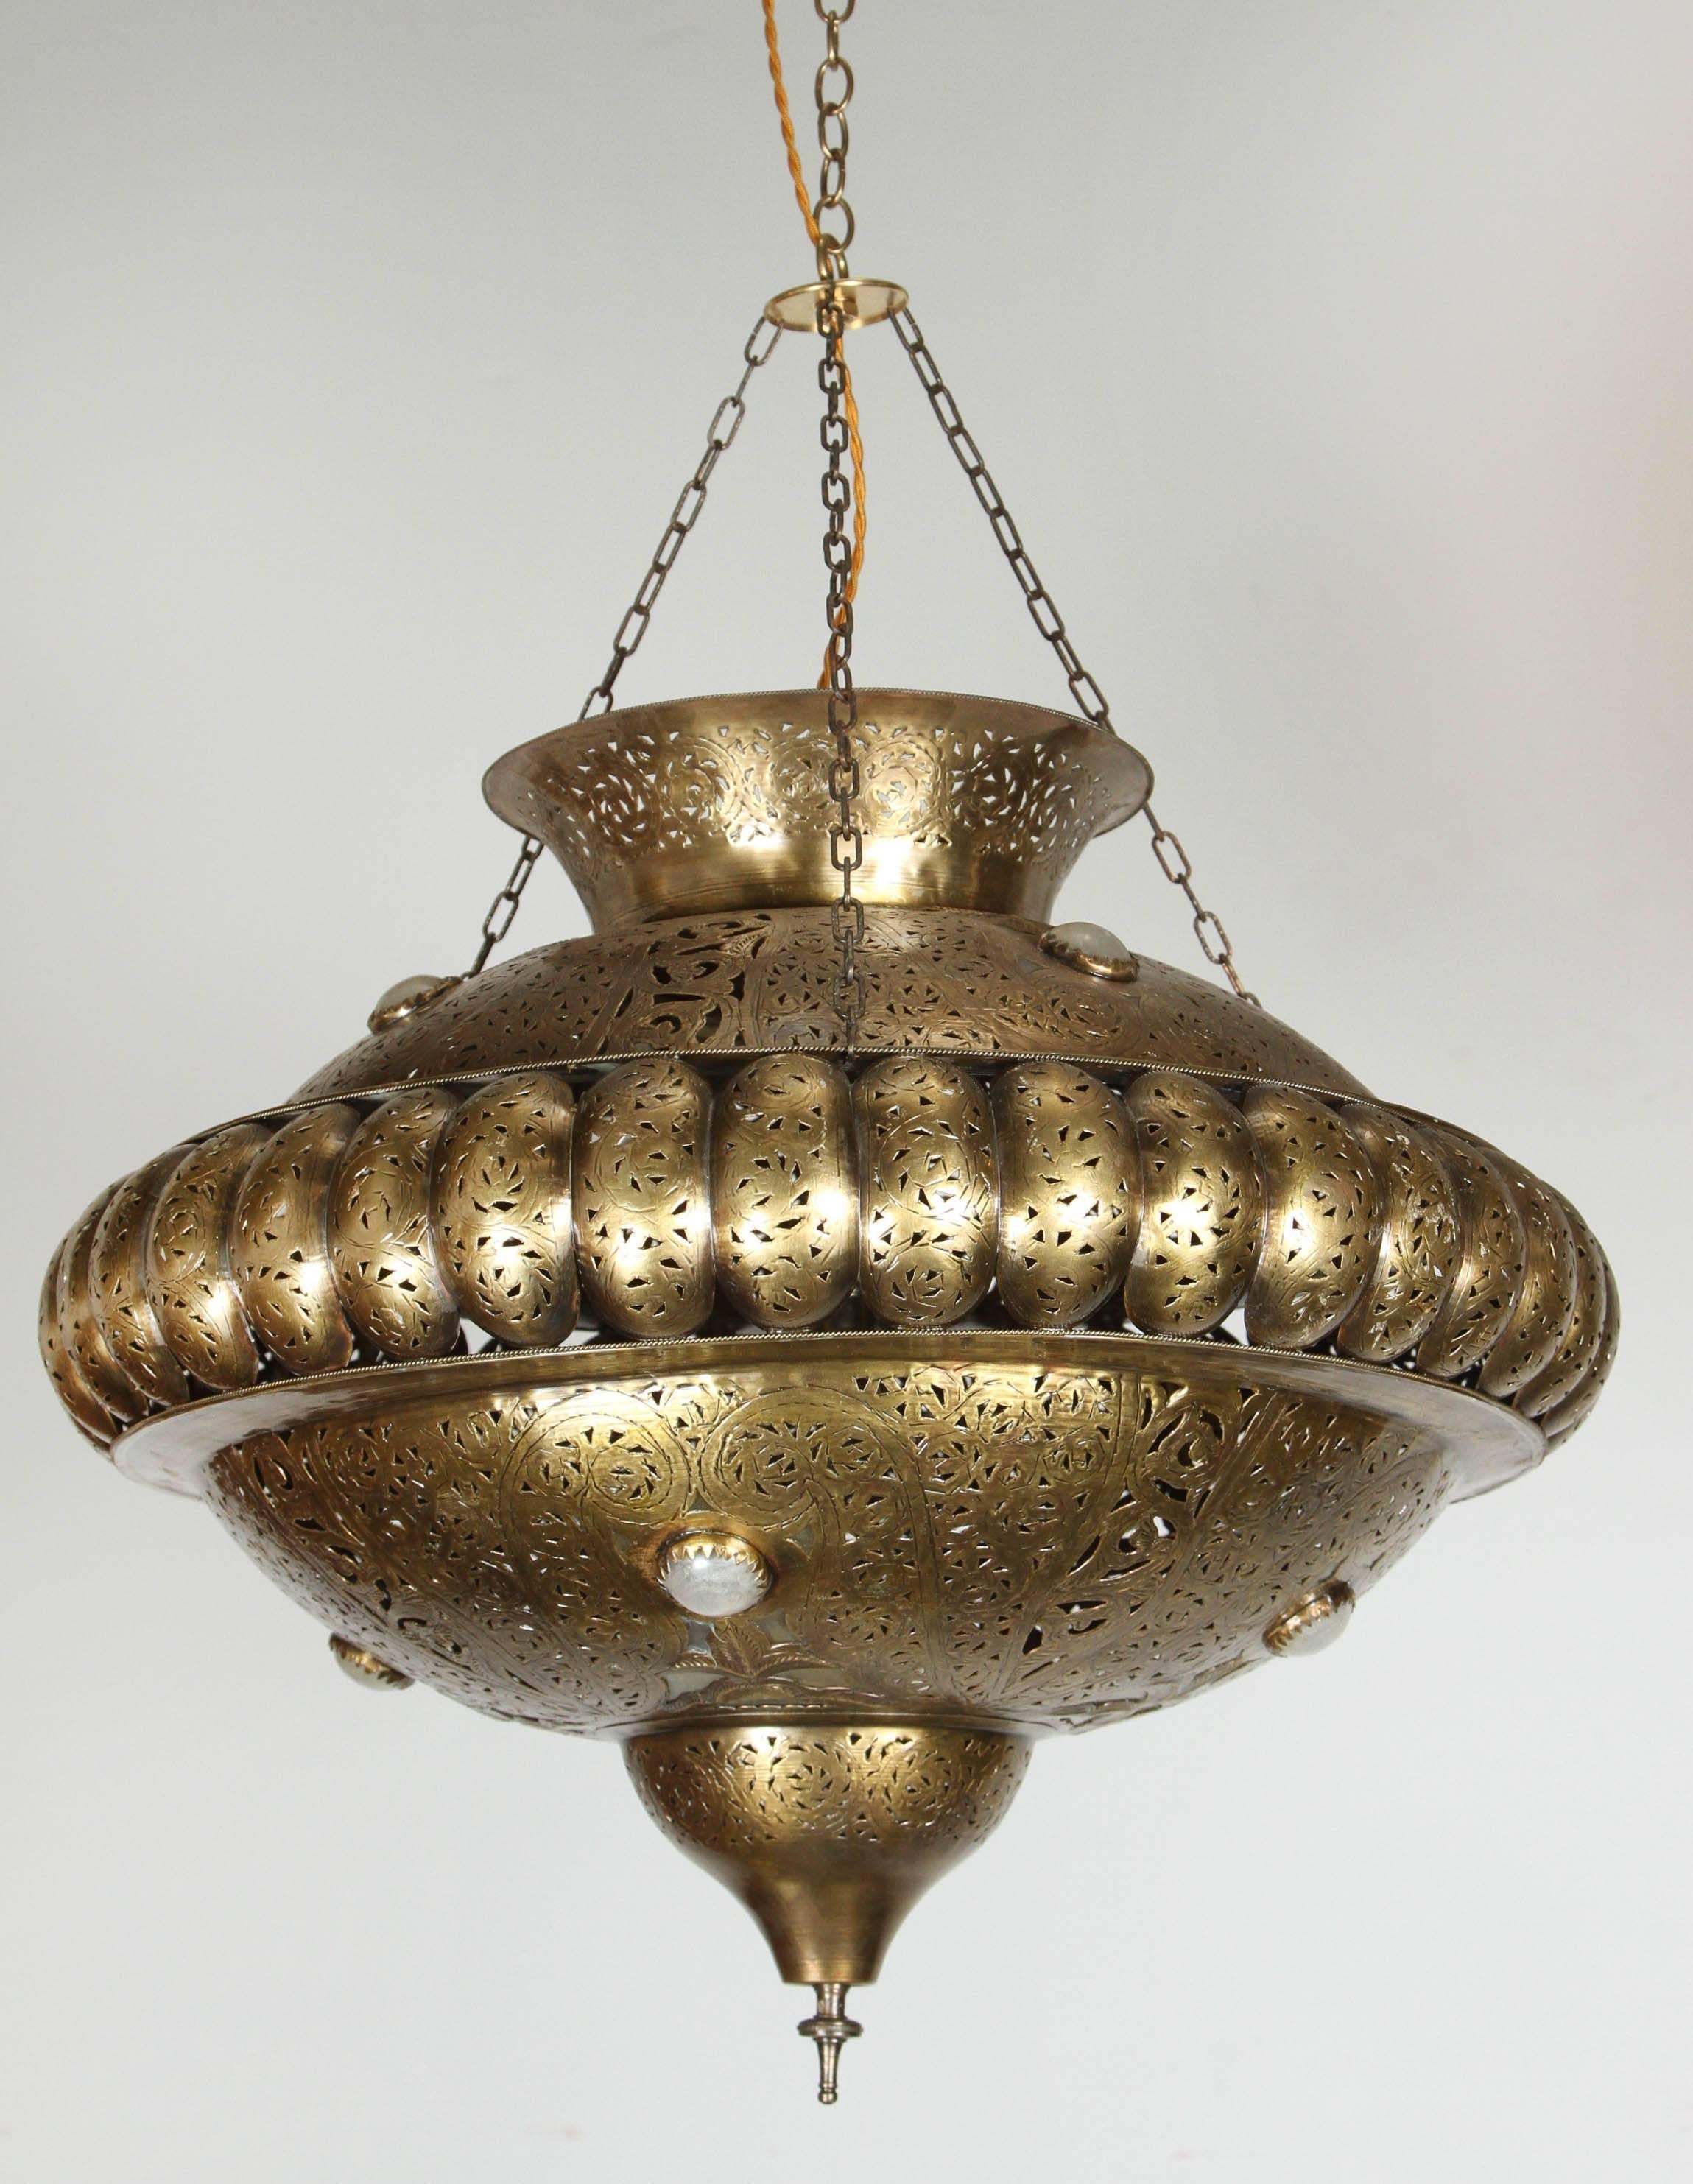 Pair of large handcrafted brass Moroccan light pendants in the style of Alberto Pinto Moorish design.
This Moorish light fixture is delicately handcrafted in brass repousse and chiseled with fine filigree designs by skilled Moroccan